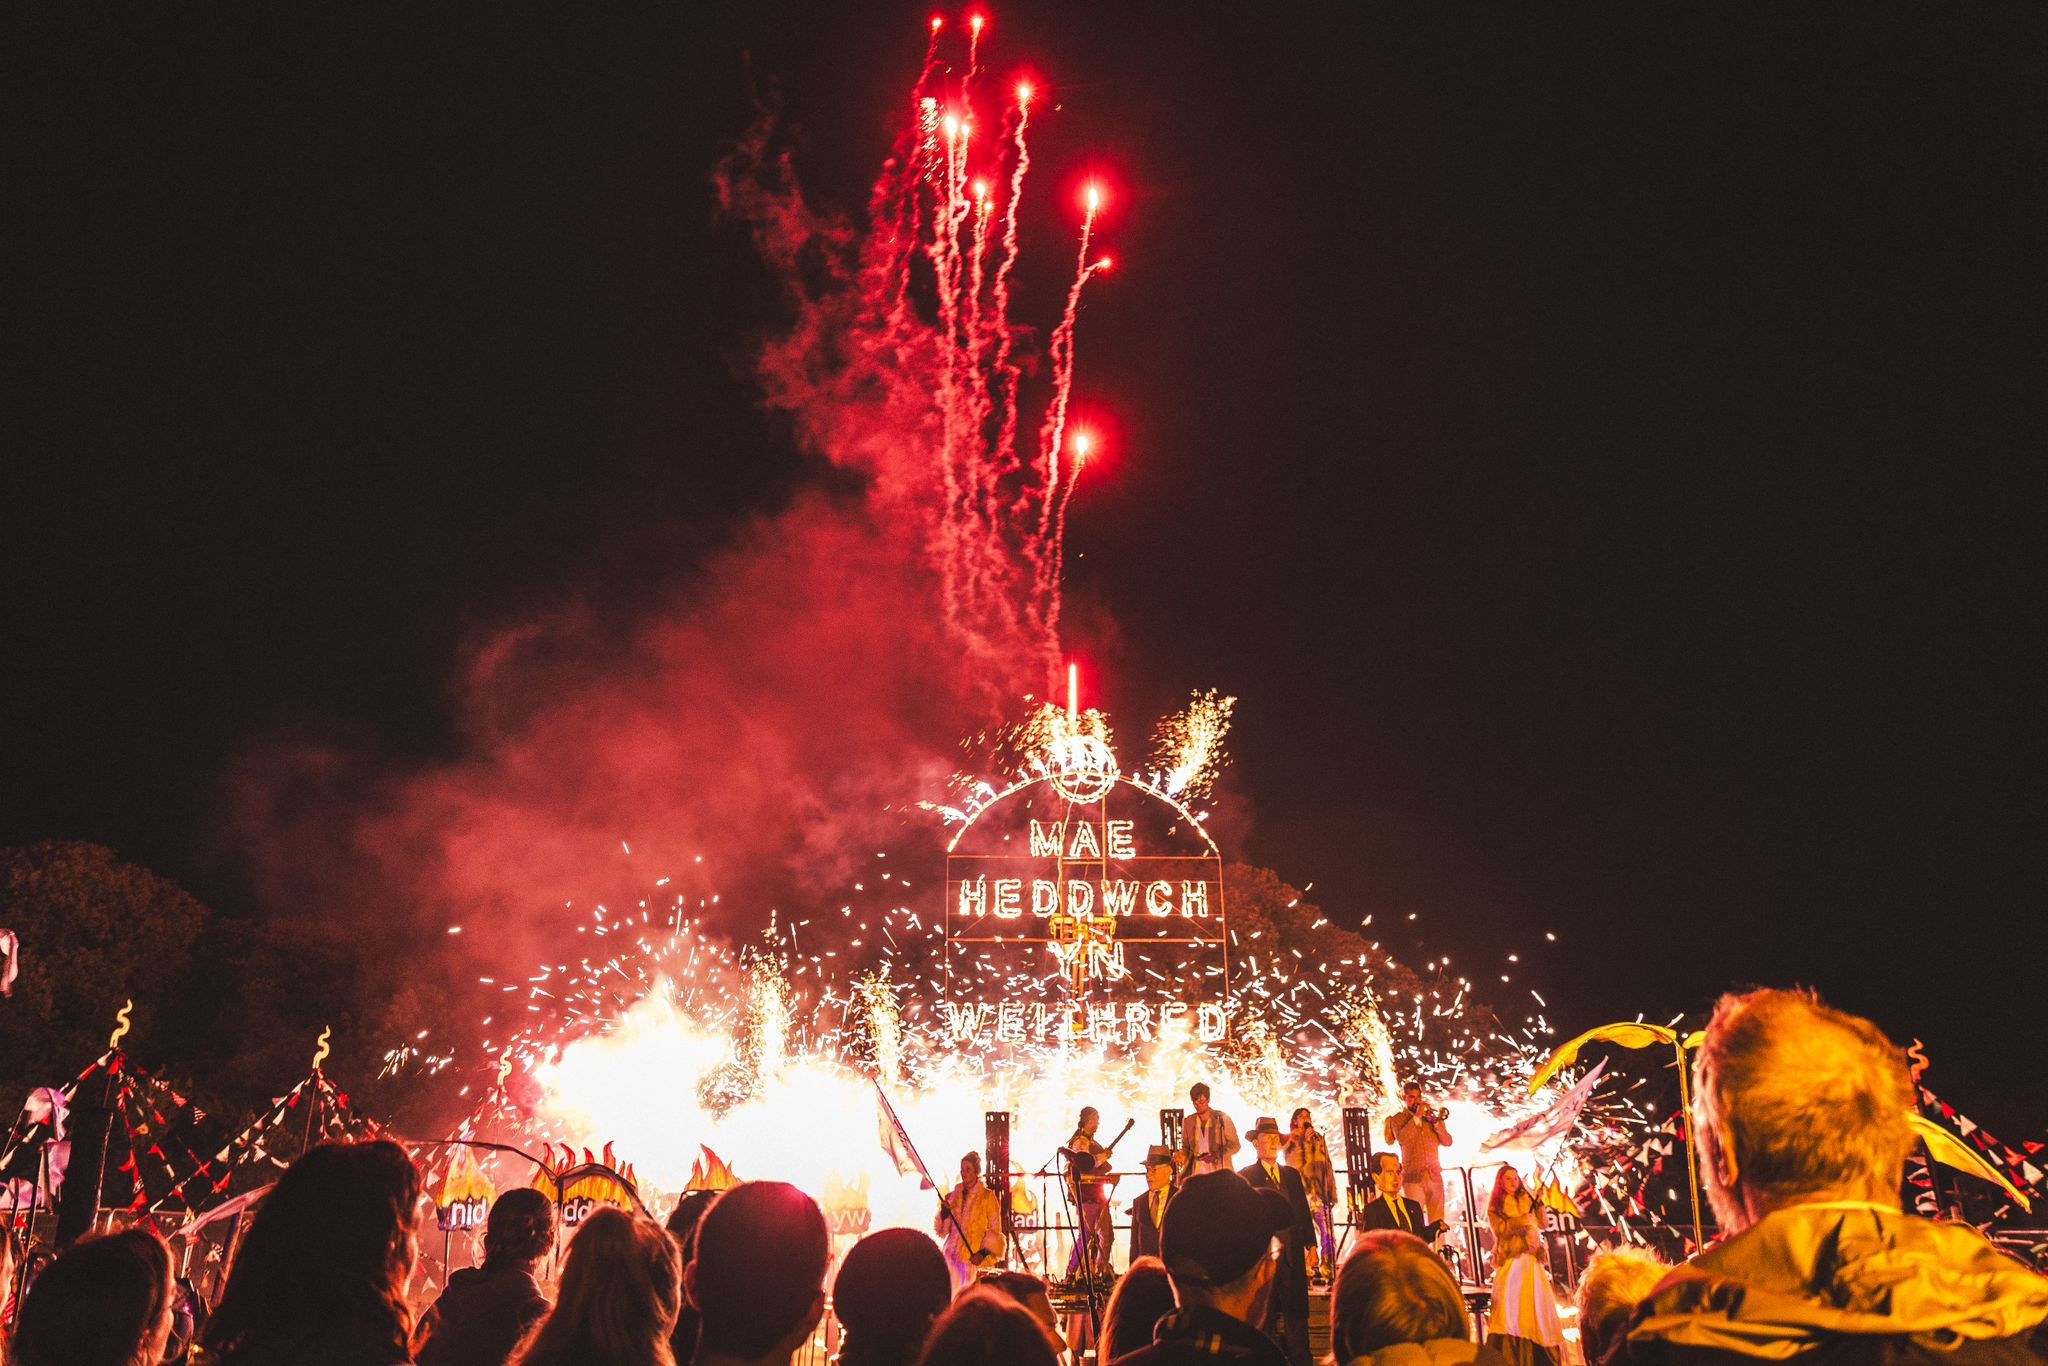 Tân yn Ll?n was an art installation that grew during the Eisteddfod and reached a powerful pinnacle in a fiery scene at the end of the week-long festival.